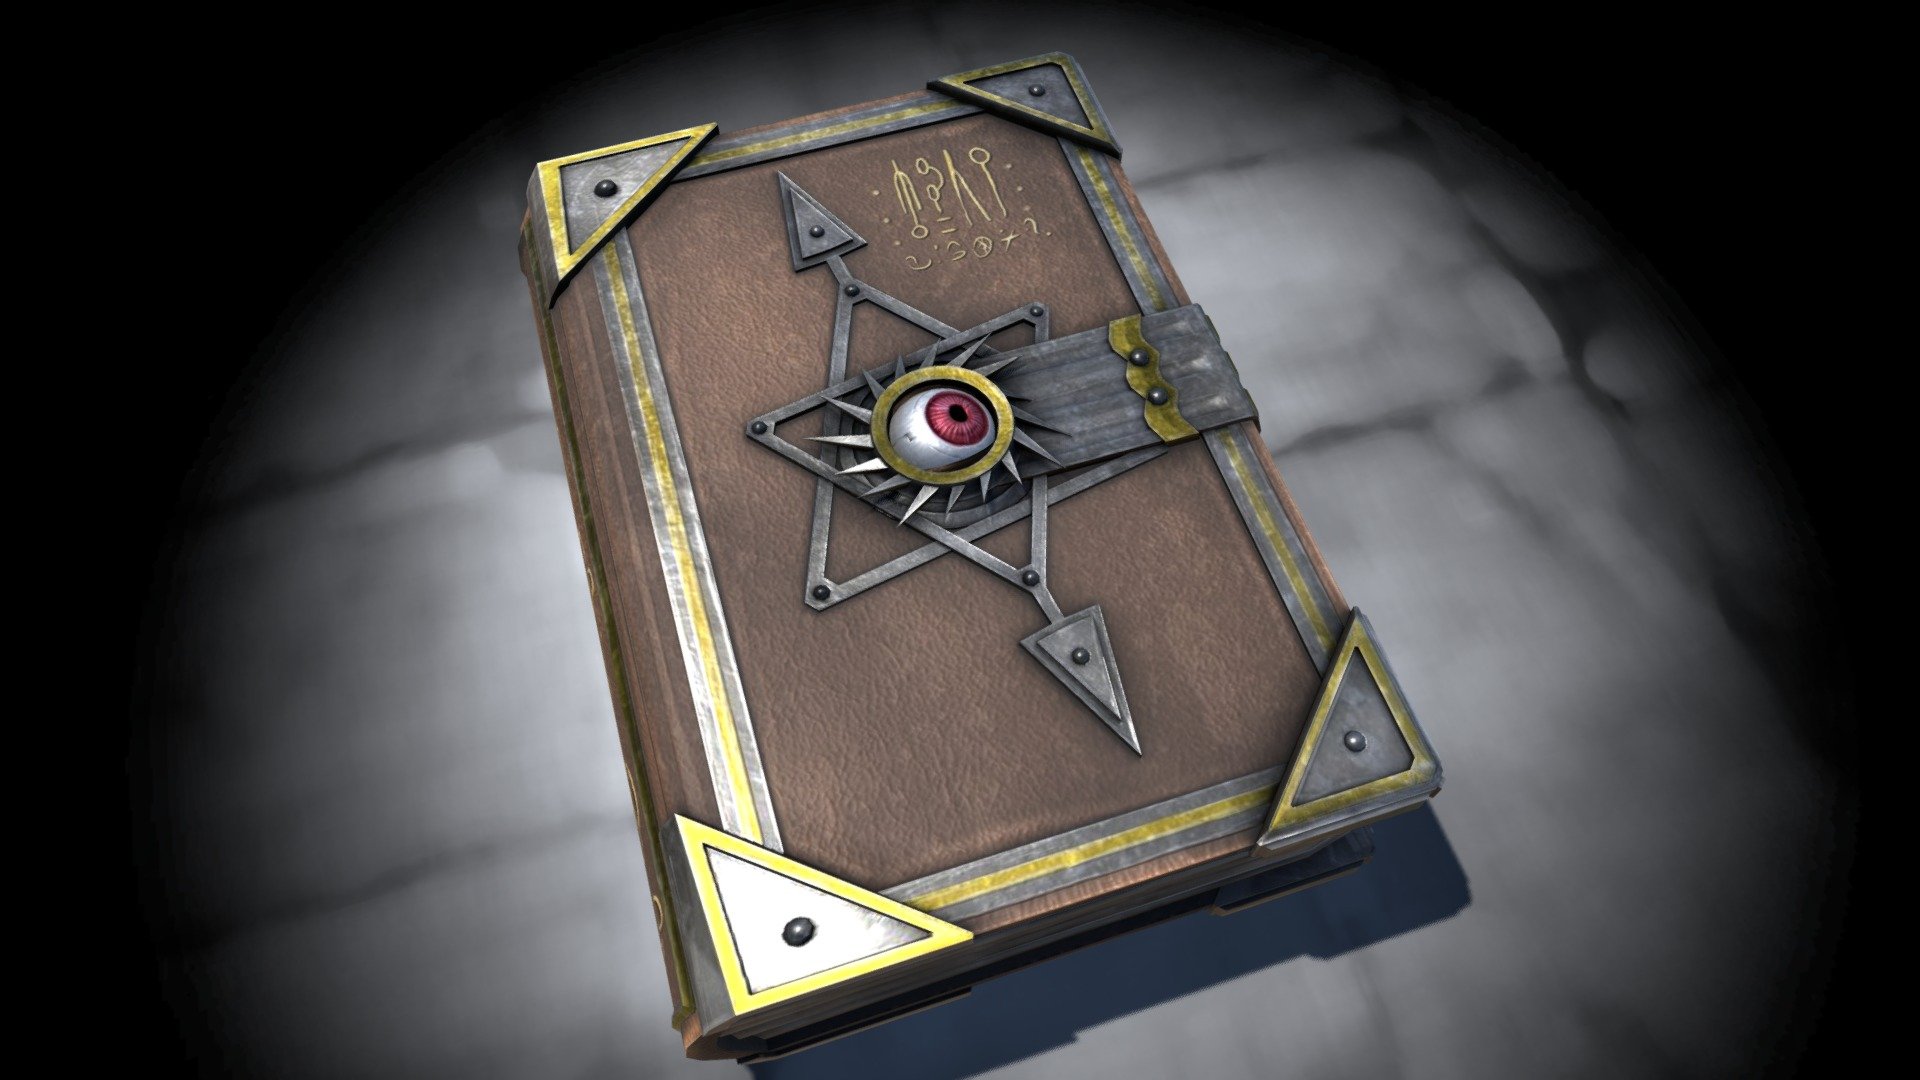 Whatever magical force binds these pages keeps an eye on the user&hellip; To what purpose this observation merits, nobody knows.

Made in Blender 3d model